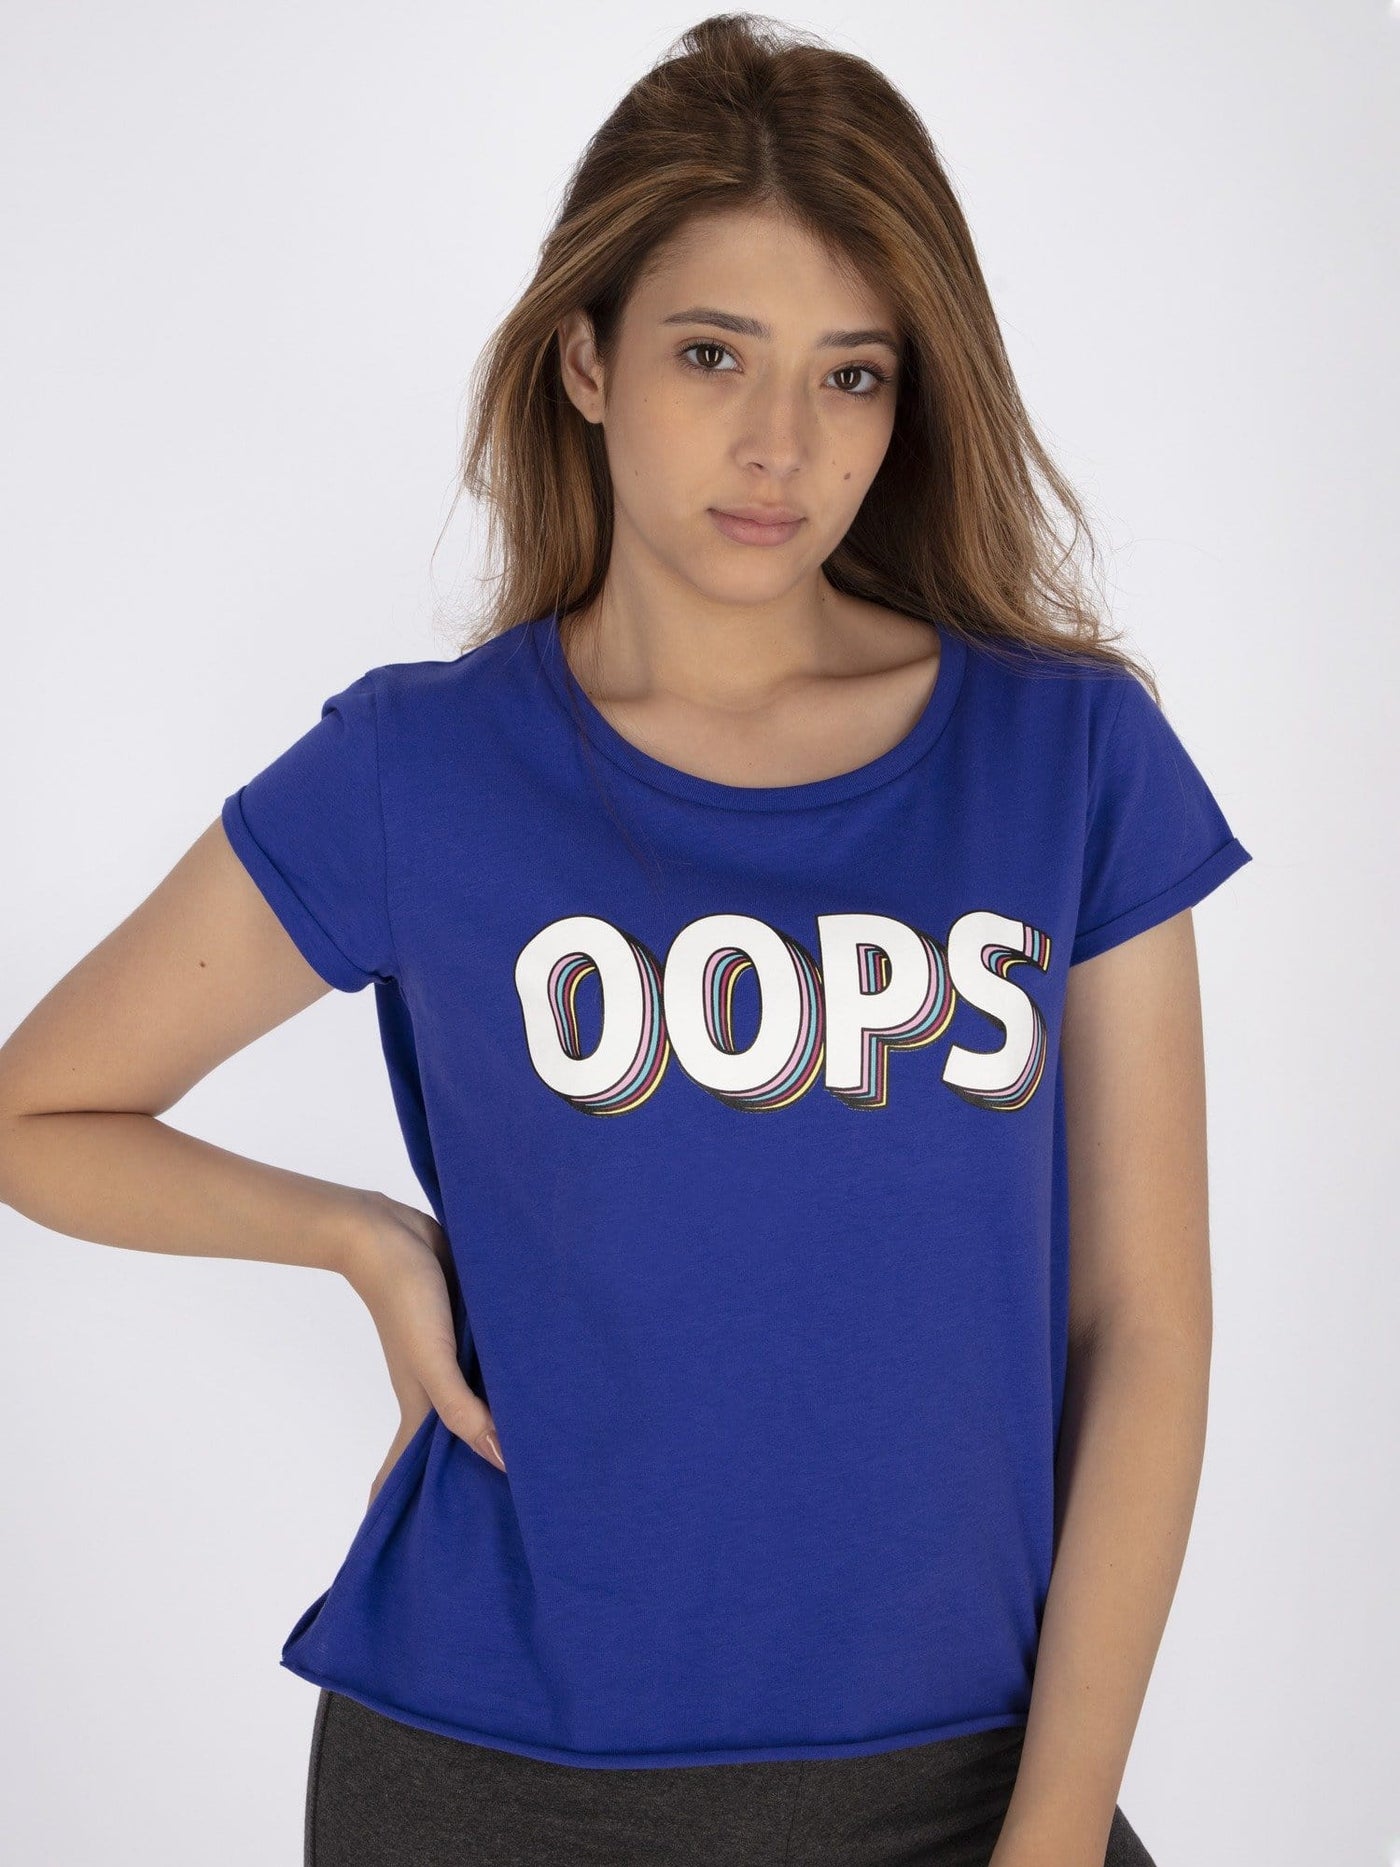 OR Tops & Blouses Royal Blue / S Love Yourself Front Text Print Short Sleeve Top